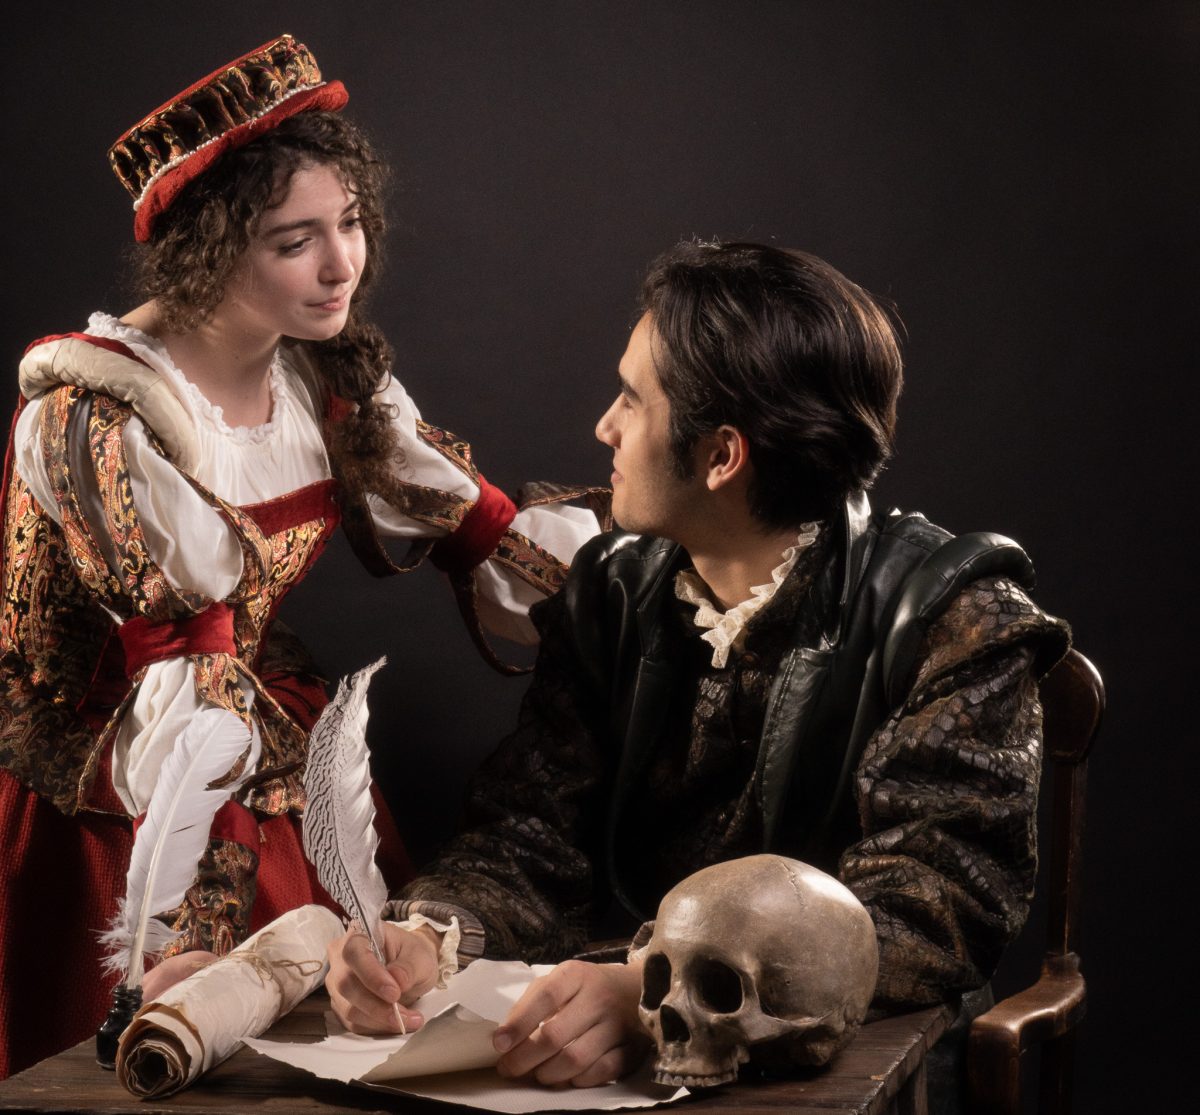 Costuming+shares+center+stage+with+actors+in+Shakespeare+in+Love.+